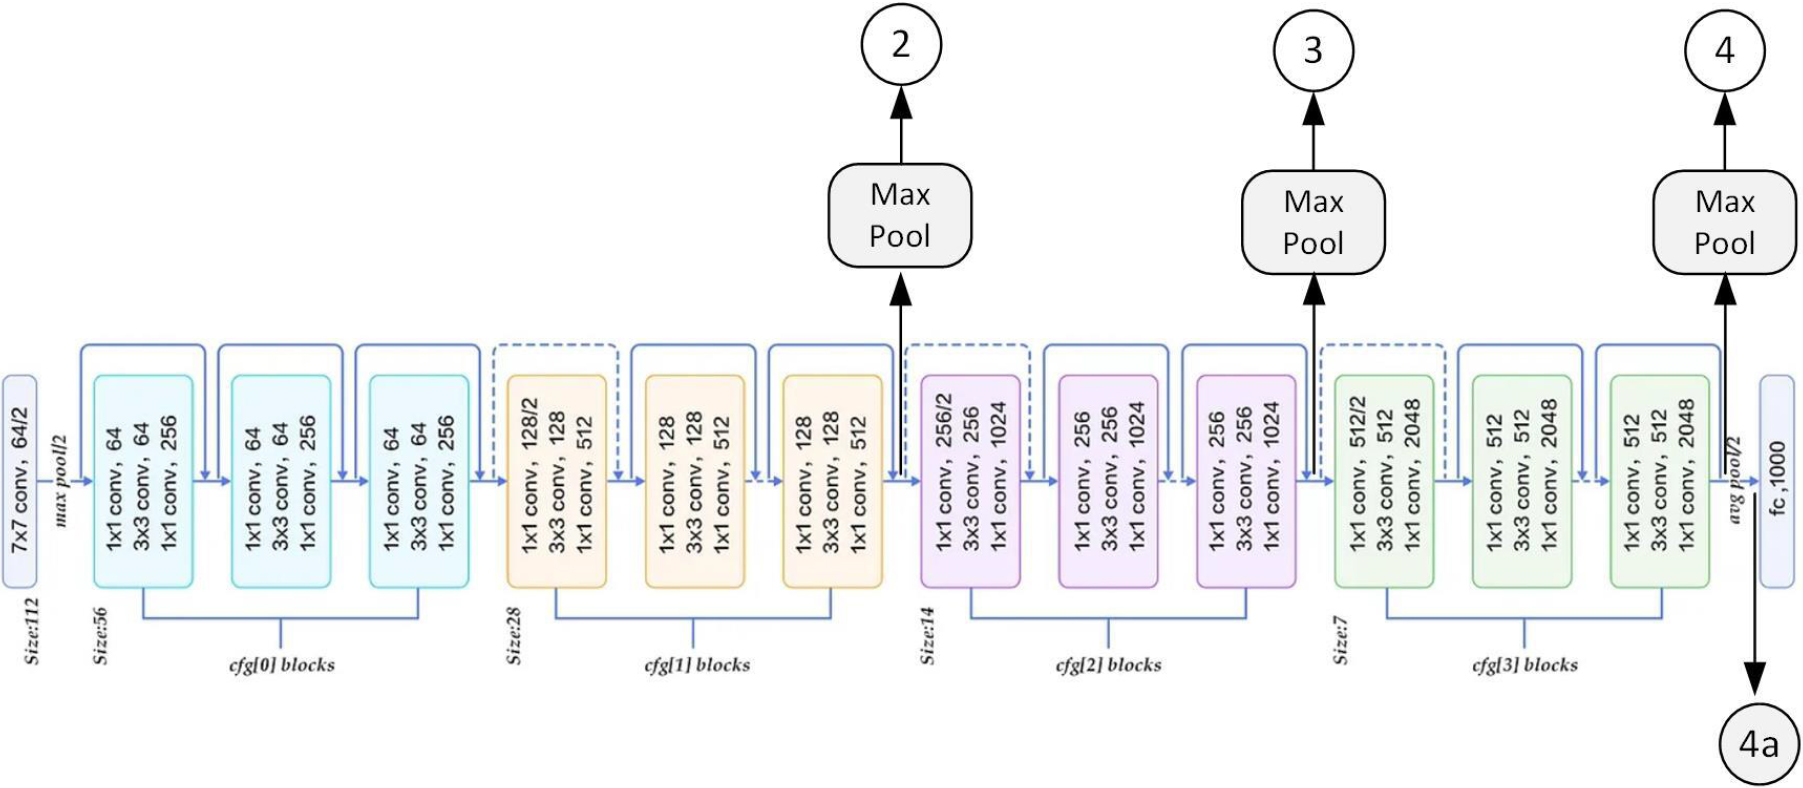 A schematic of the ResNet-50 network architecture and various feature extraction layers used in this paper. (4a) is the ResNet-50 layer after the last average-pool block and before the fully connected one. ResFeats are composed of the (2) + (3) + (4) layers, which come after the max-pool blocks. Adapted from [44].